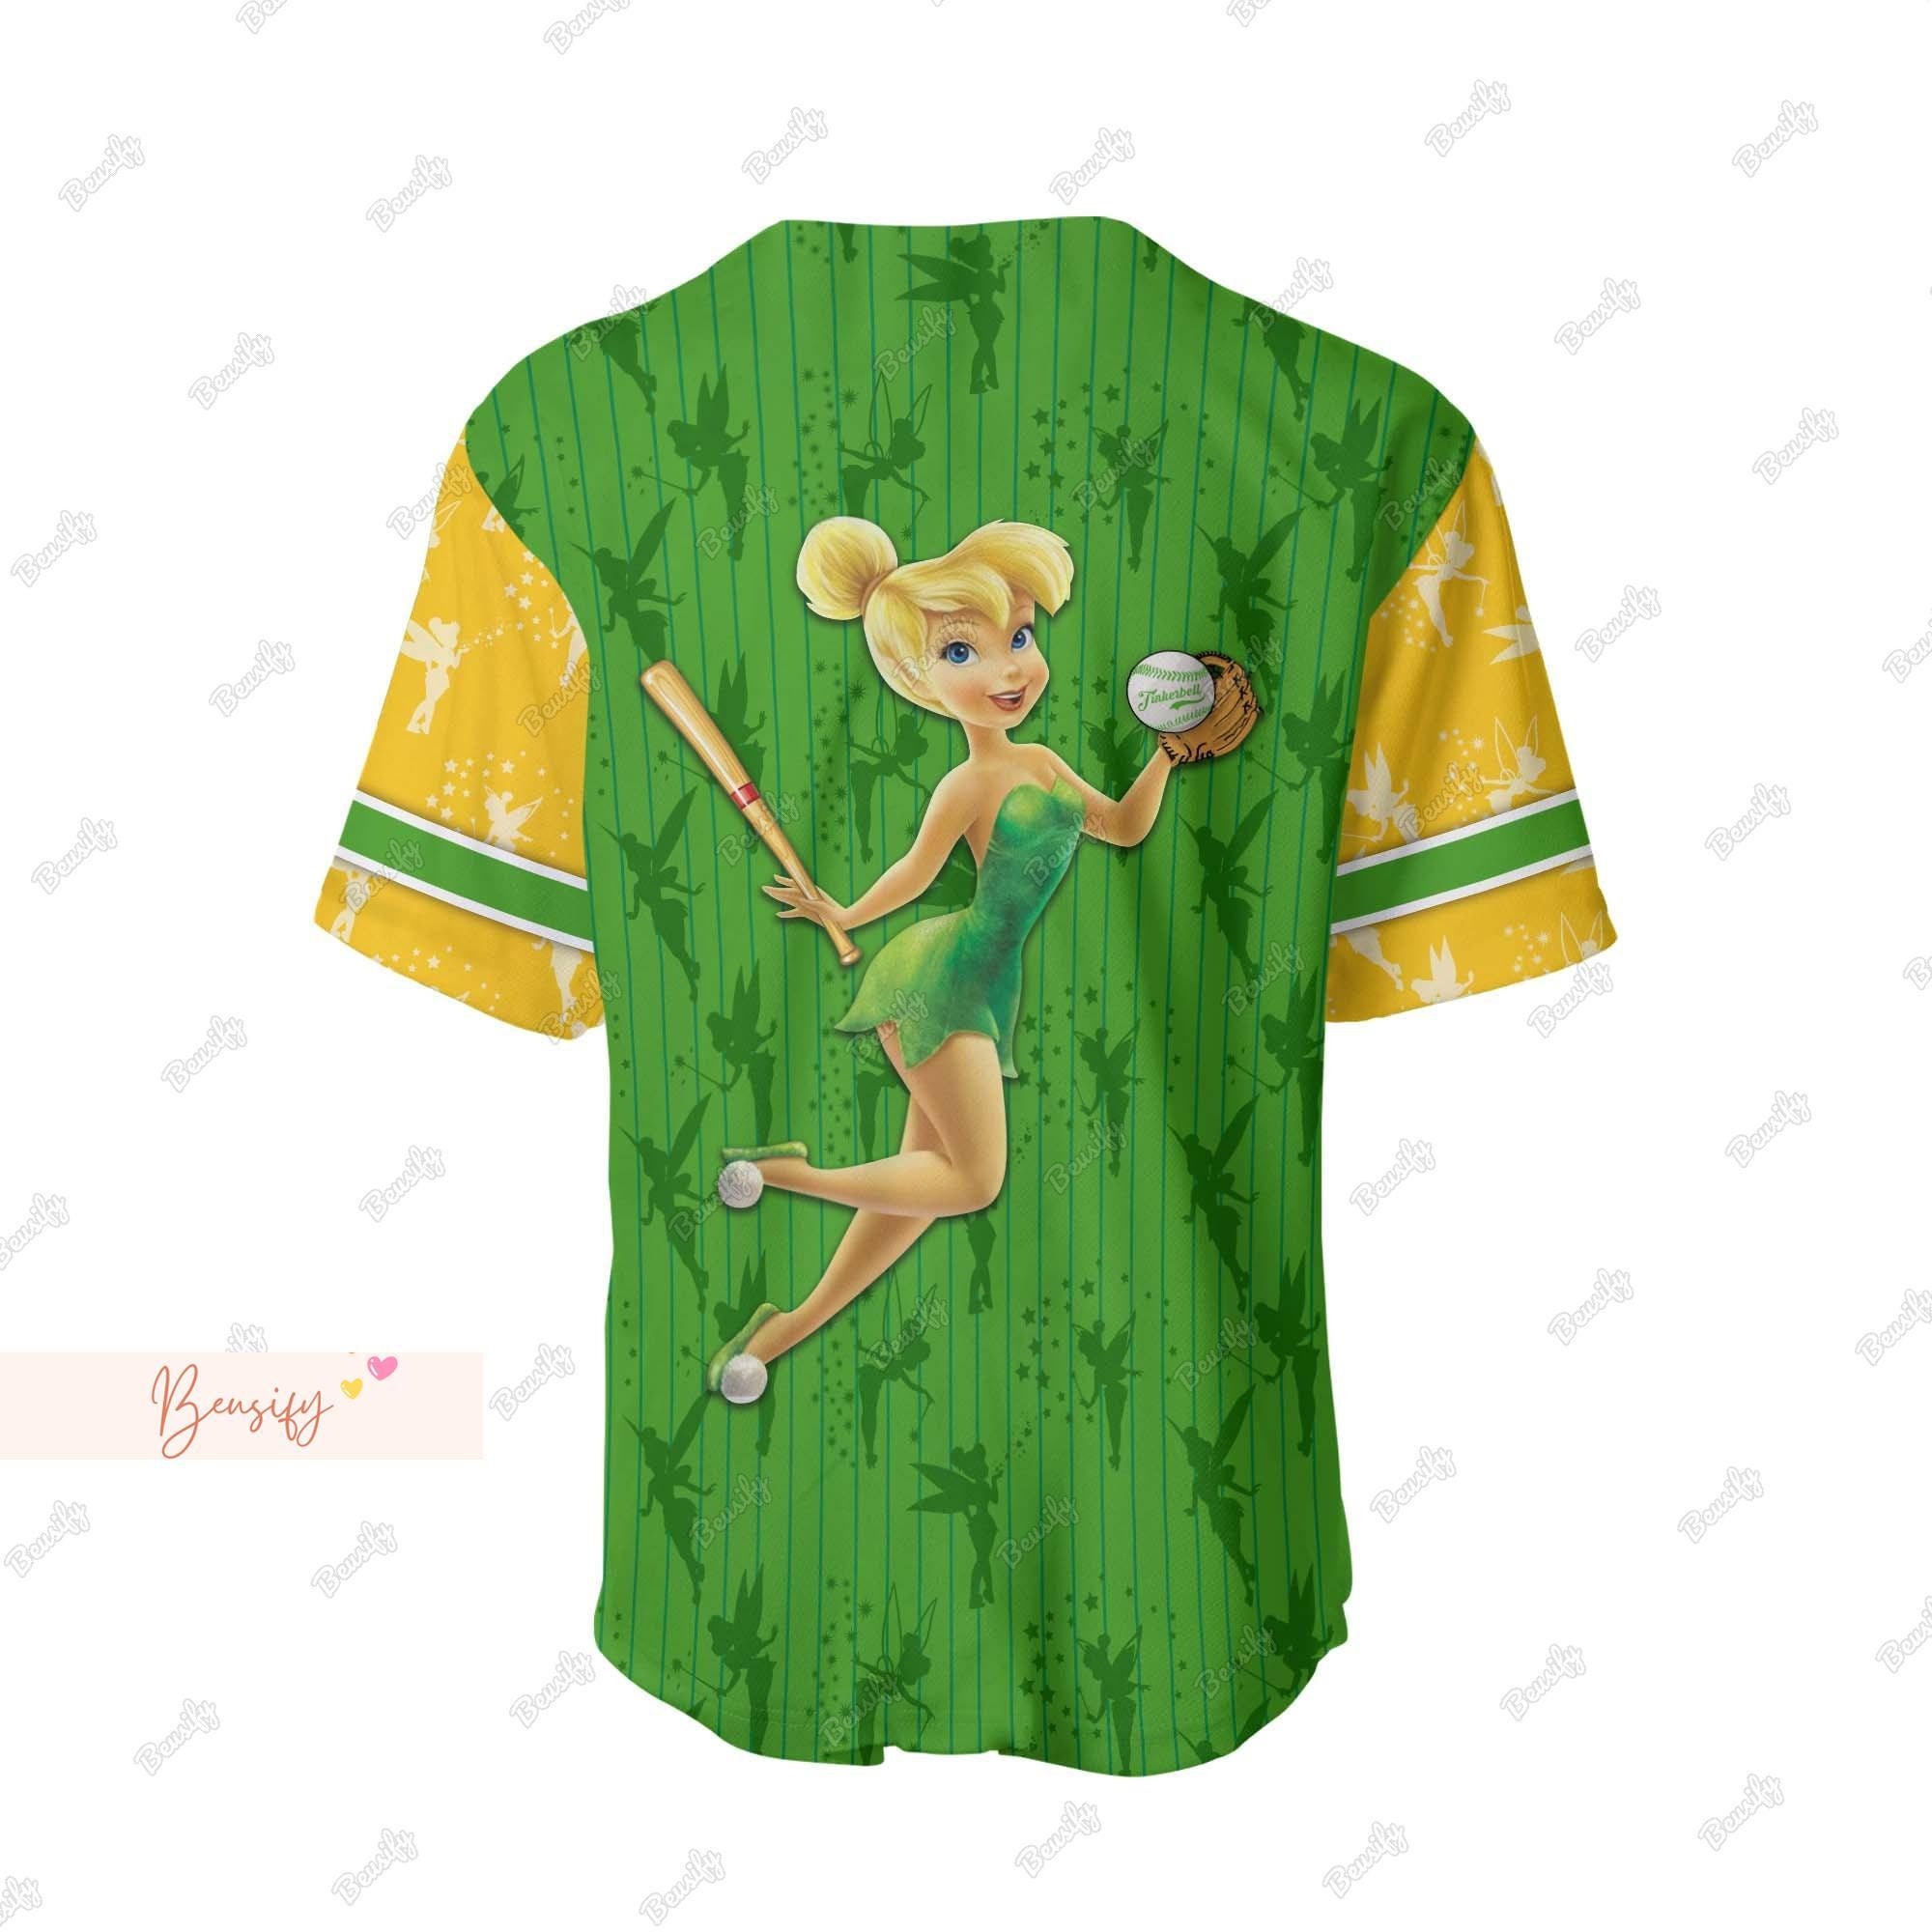 Tinker Bell Jersey Shirt, Personalized Tinker Bell Jersey, Tinker Bell Baseball Jersey